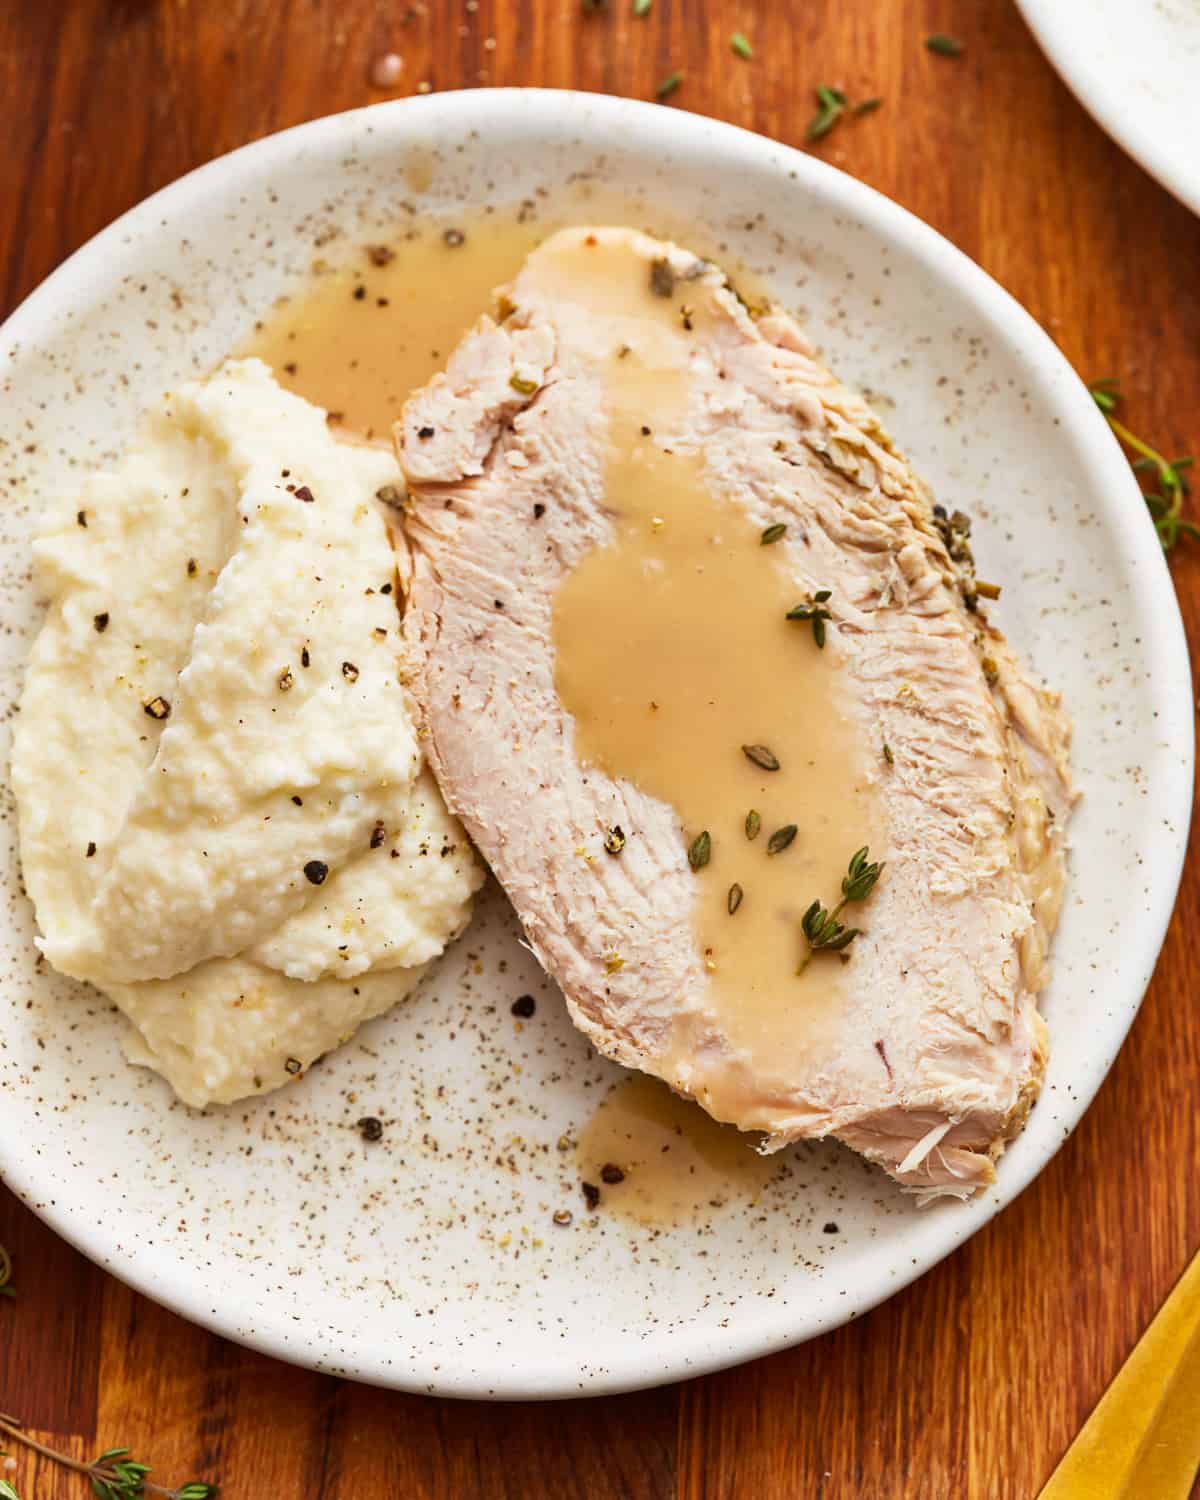 Instant pot turkey breast with gravy and mashed potatoes on a plate.